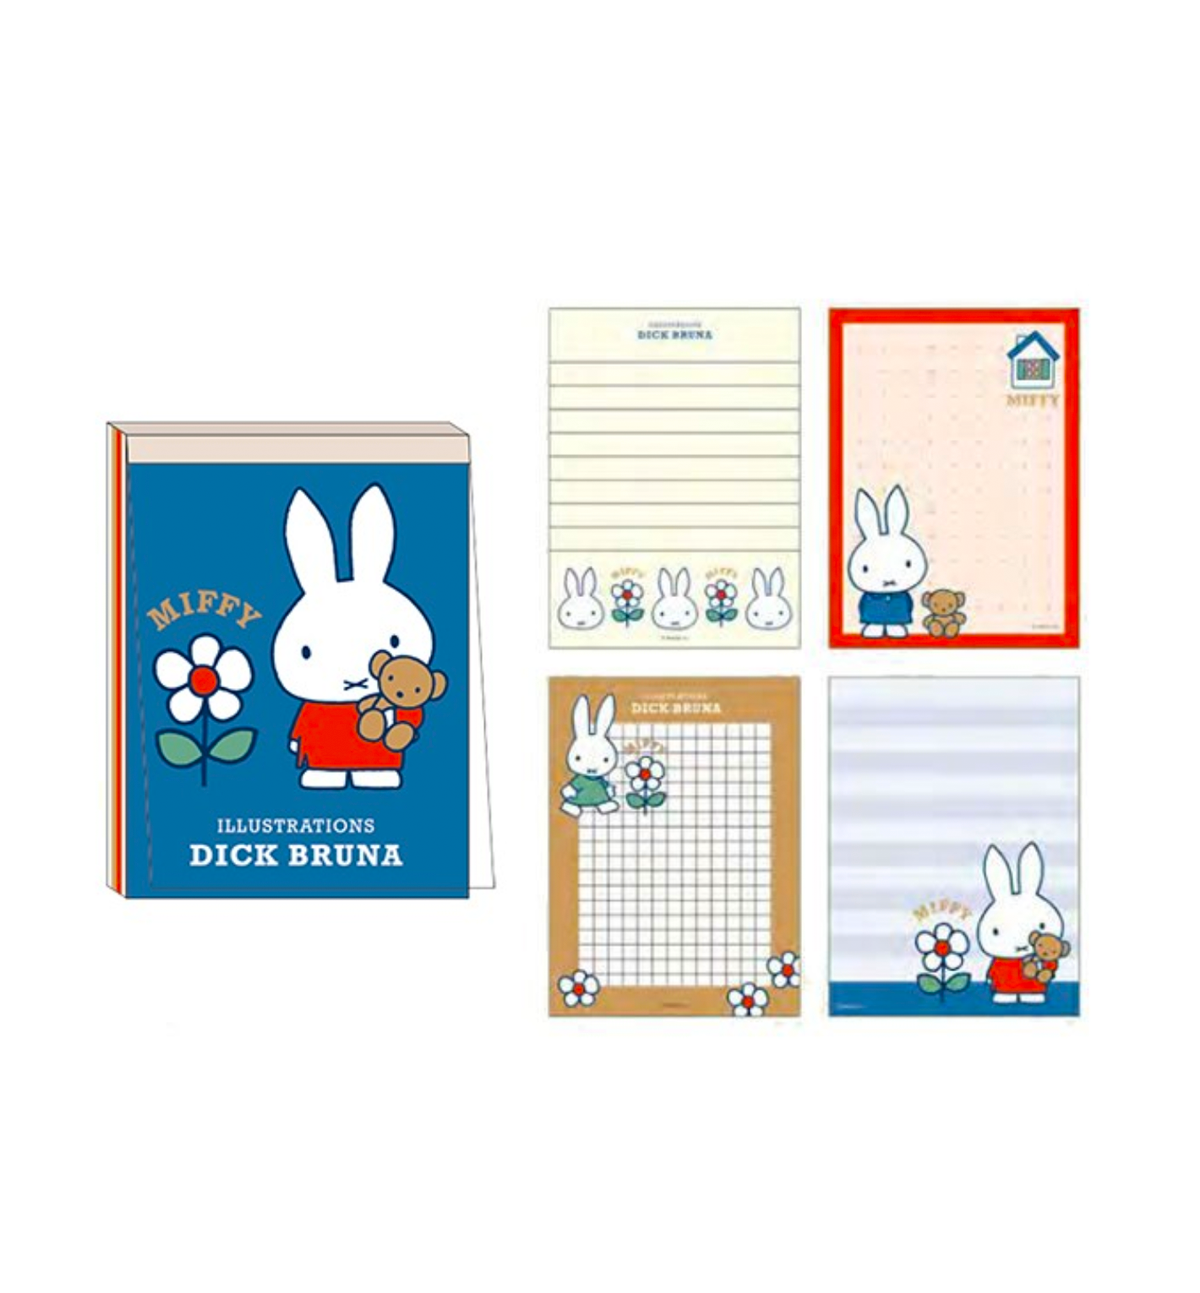 Buy Cyril New Arrival 365 Days Personal Diary Planner Hardcover Weekly  Schedule Cute Korean Stationery Flower Agenda Online at desertcartEcuador